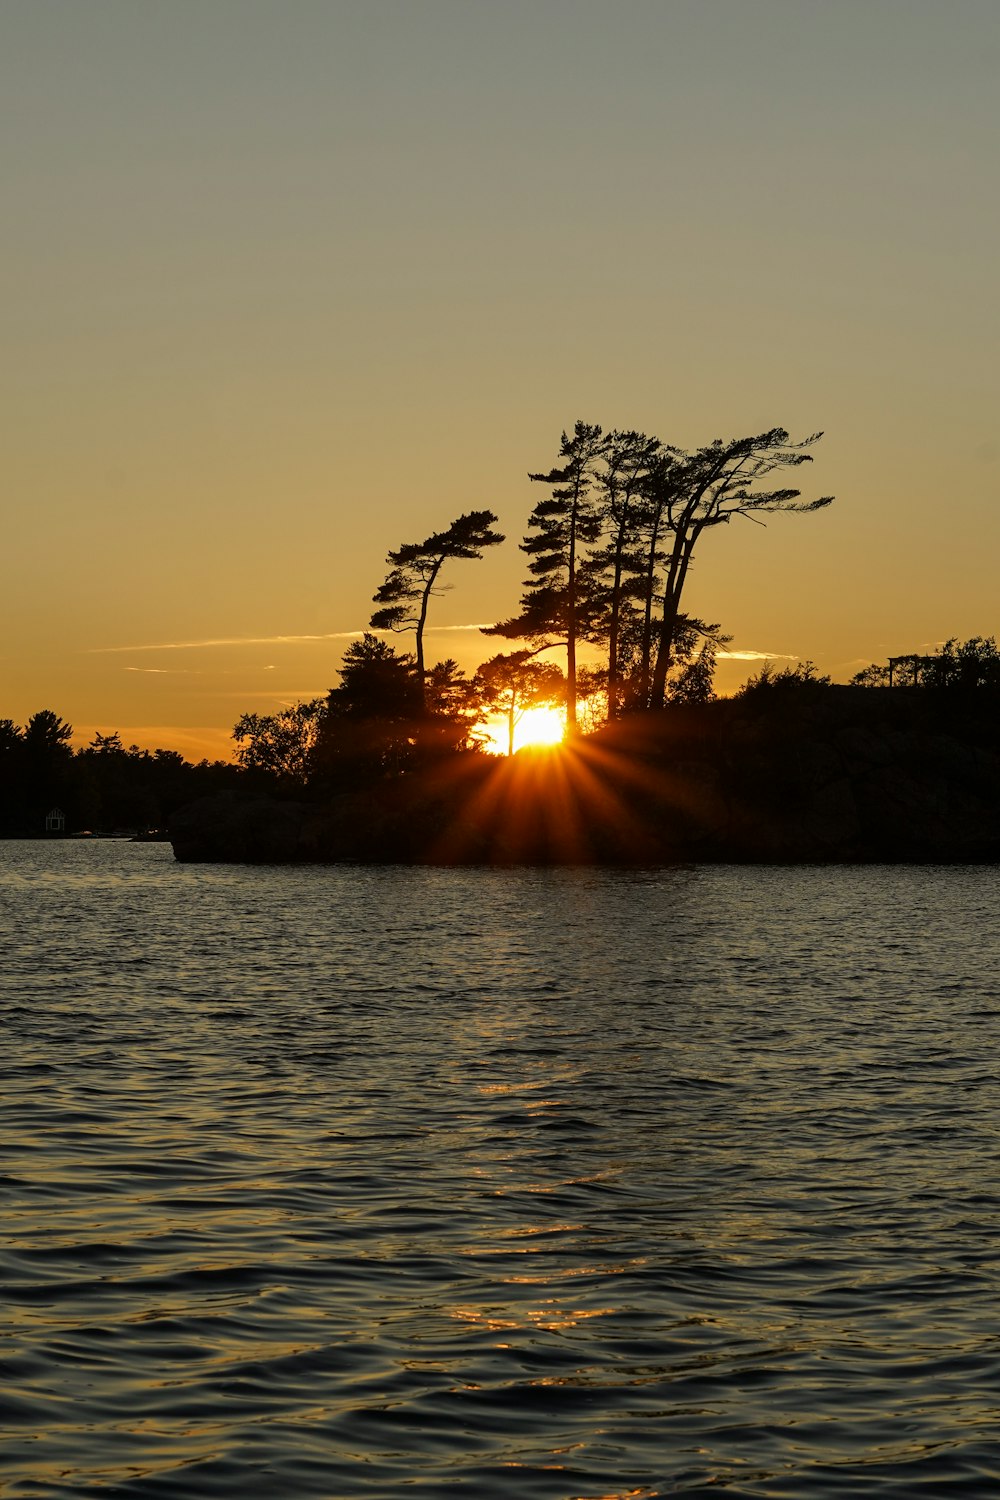 the sun is setting over a small island in the water